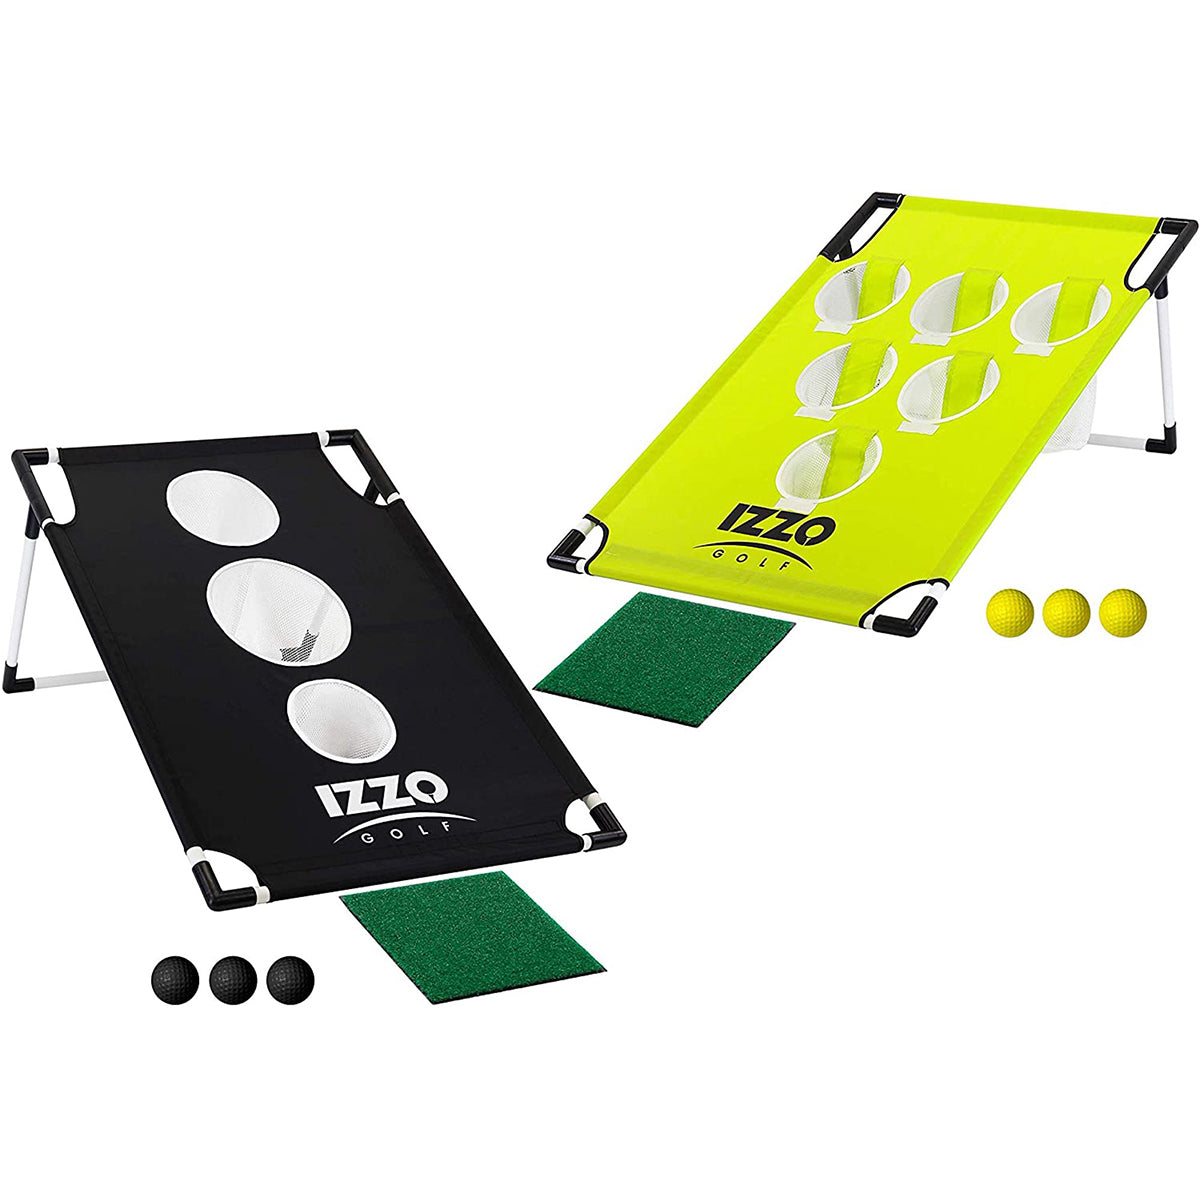 Izzo Golf Pong-Hole Chipping Practice and Gaming Set Izzo